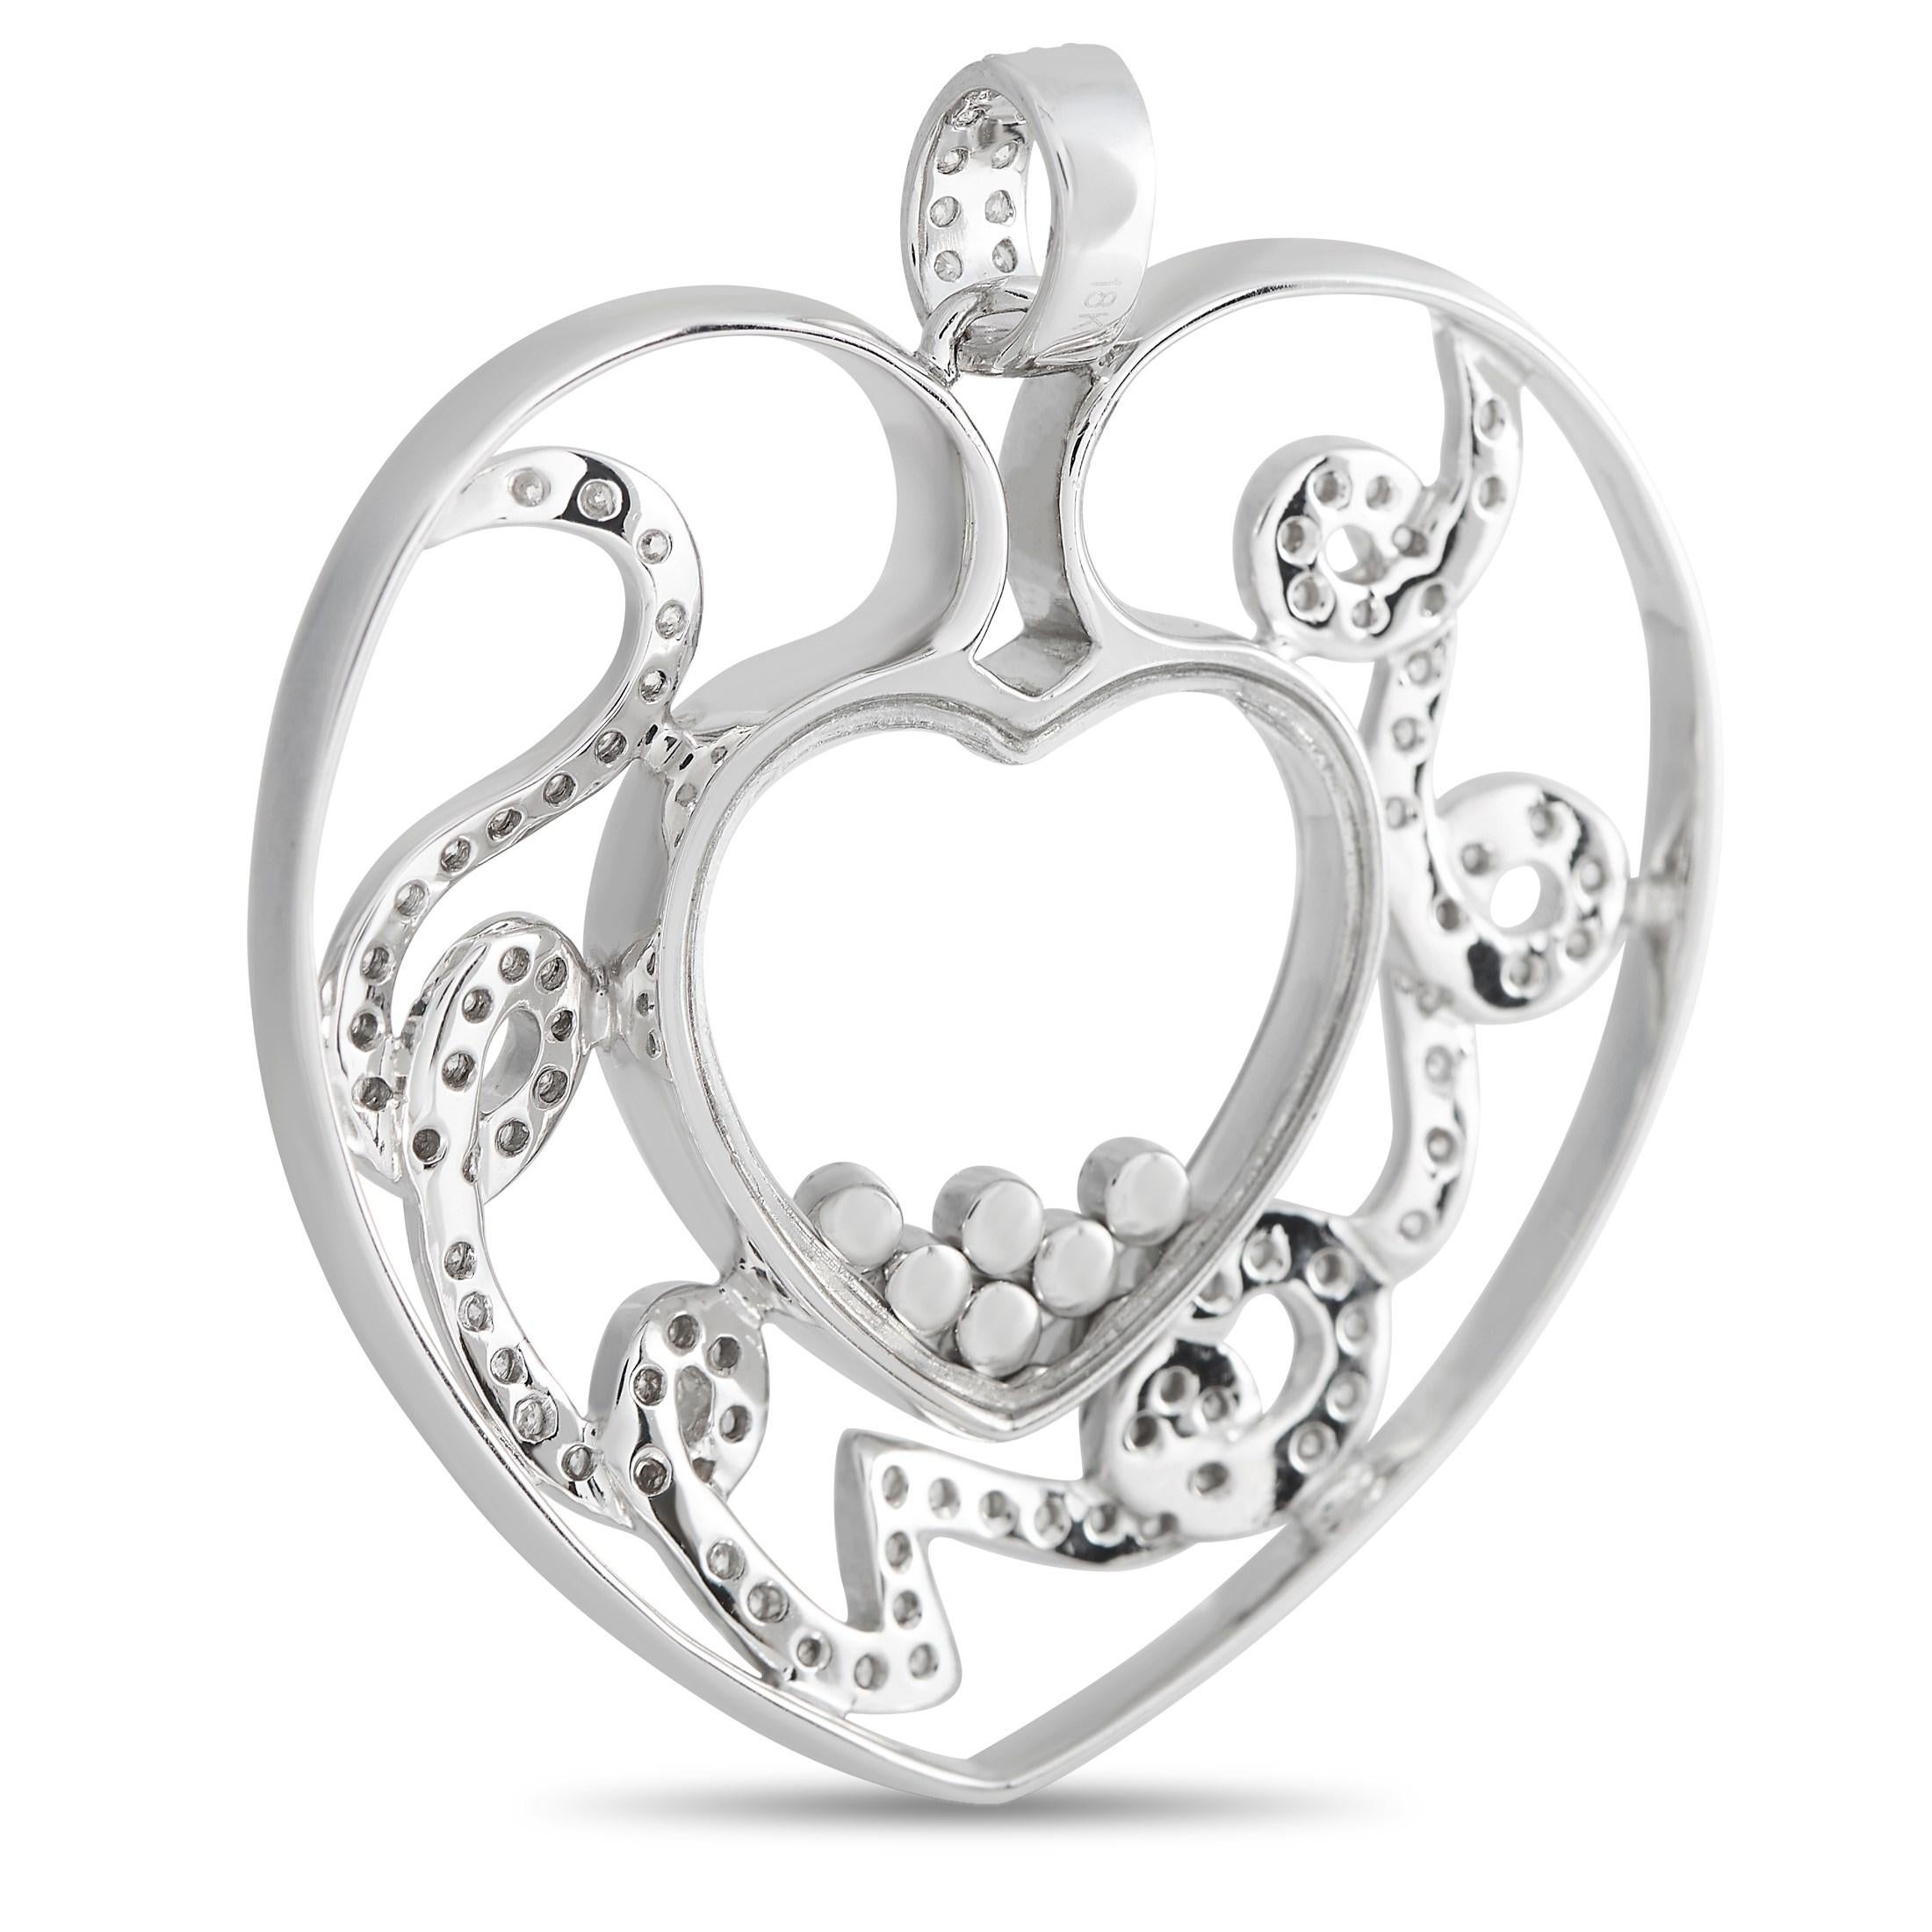 Curved lines and floating diamonds give this luxurious pendant an undeniable sense of charm. This 18K White Gold heart-shaped pendant measures 1.65” long, 1.5” wide, and includes a stylish design that features negative space elements for added